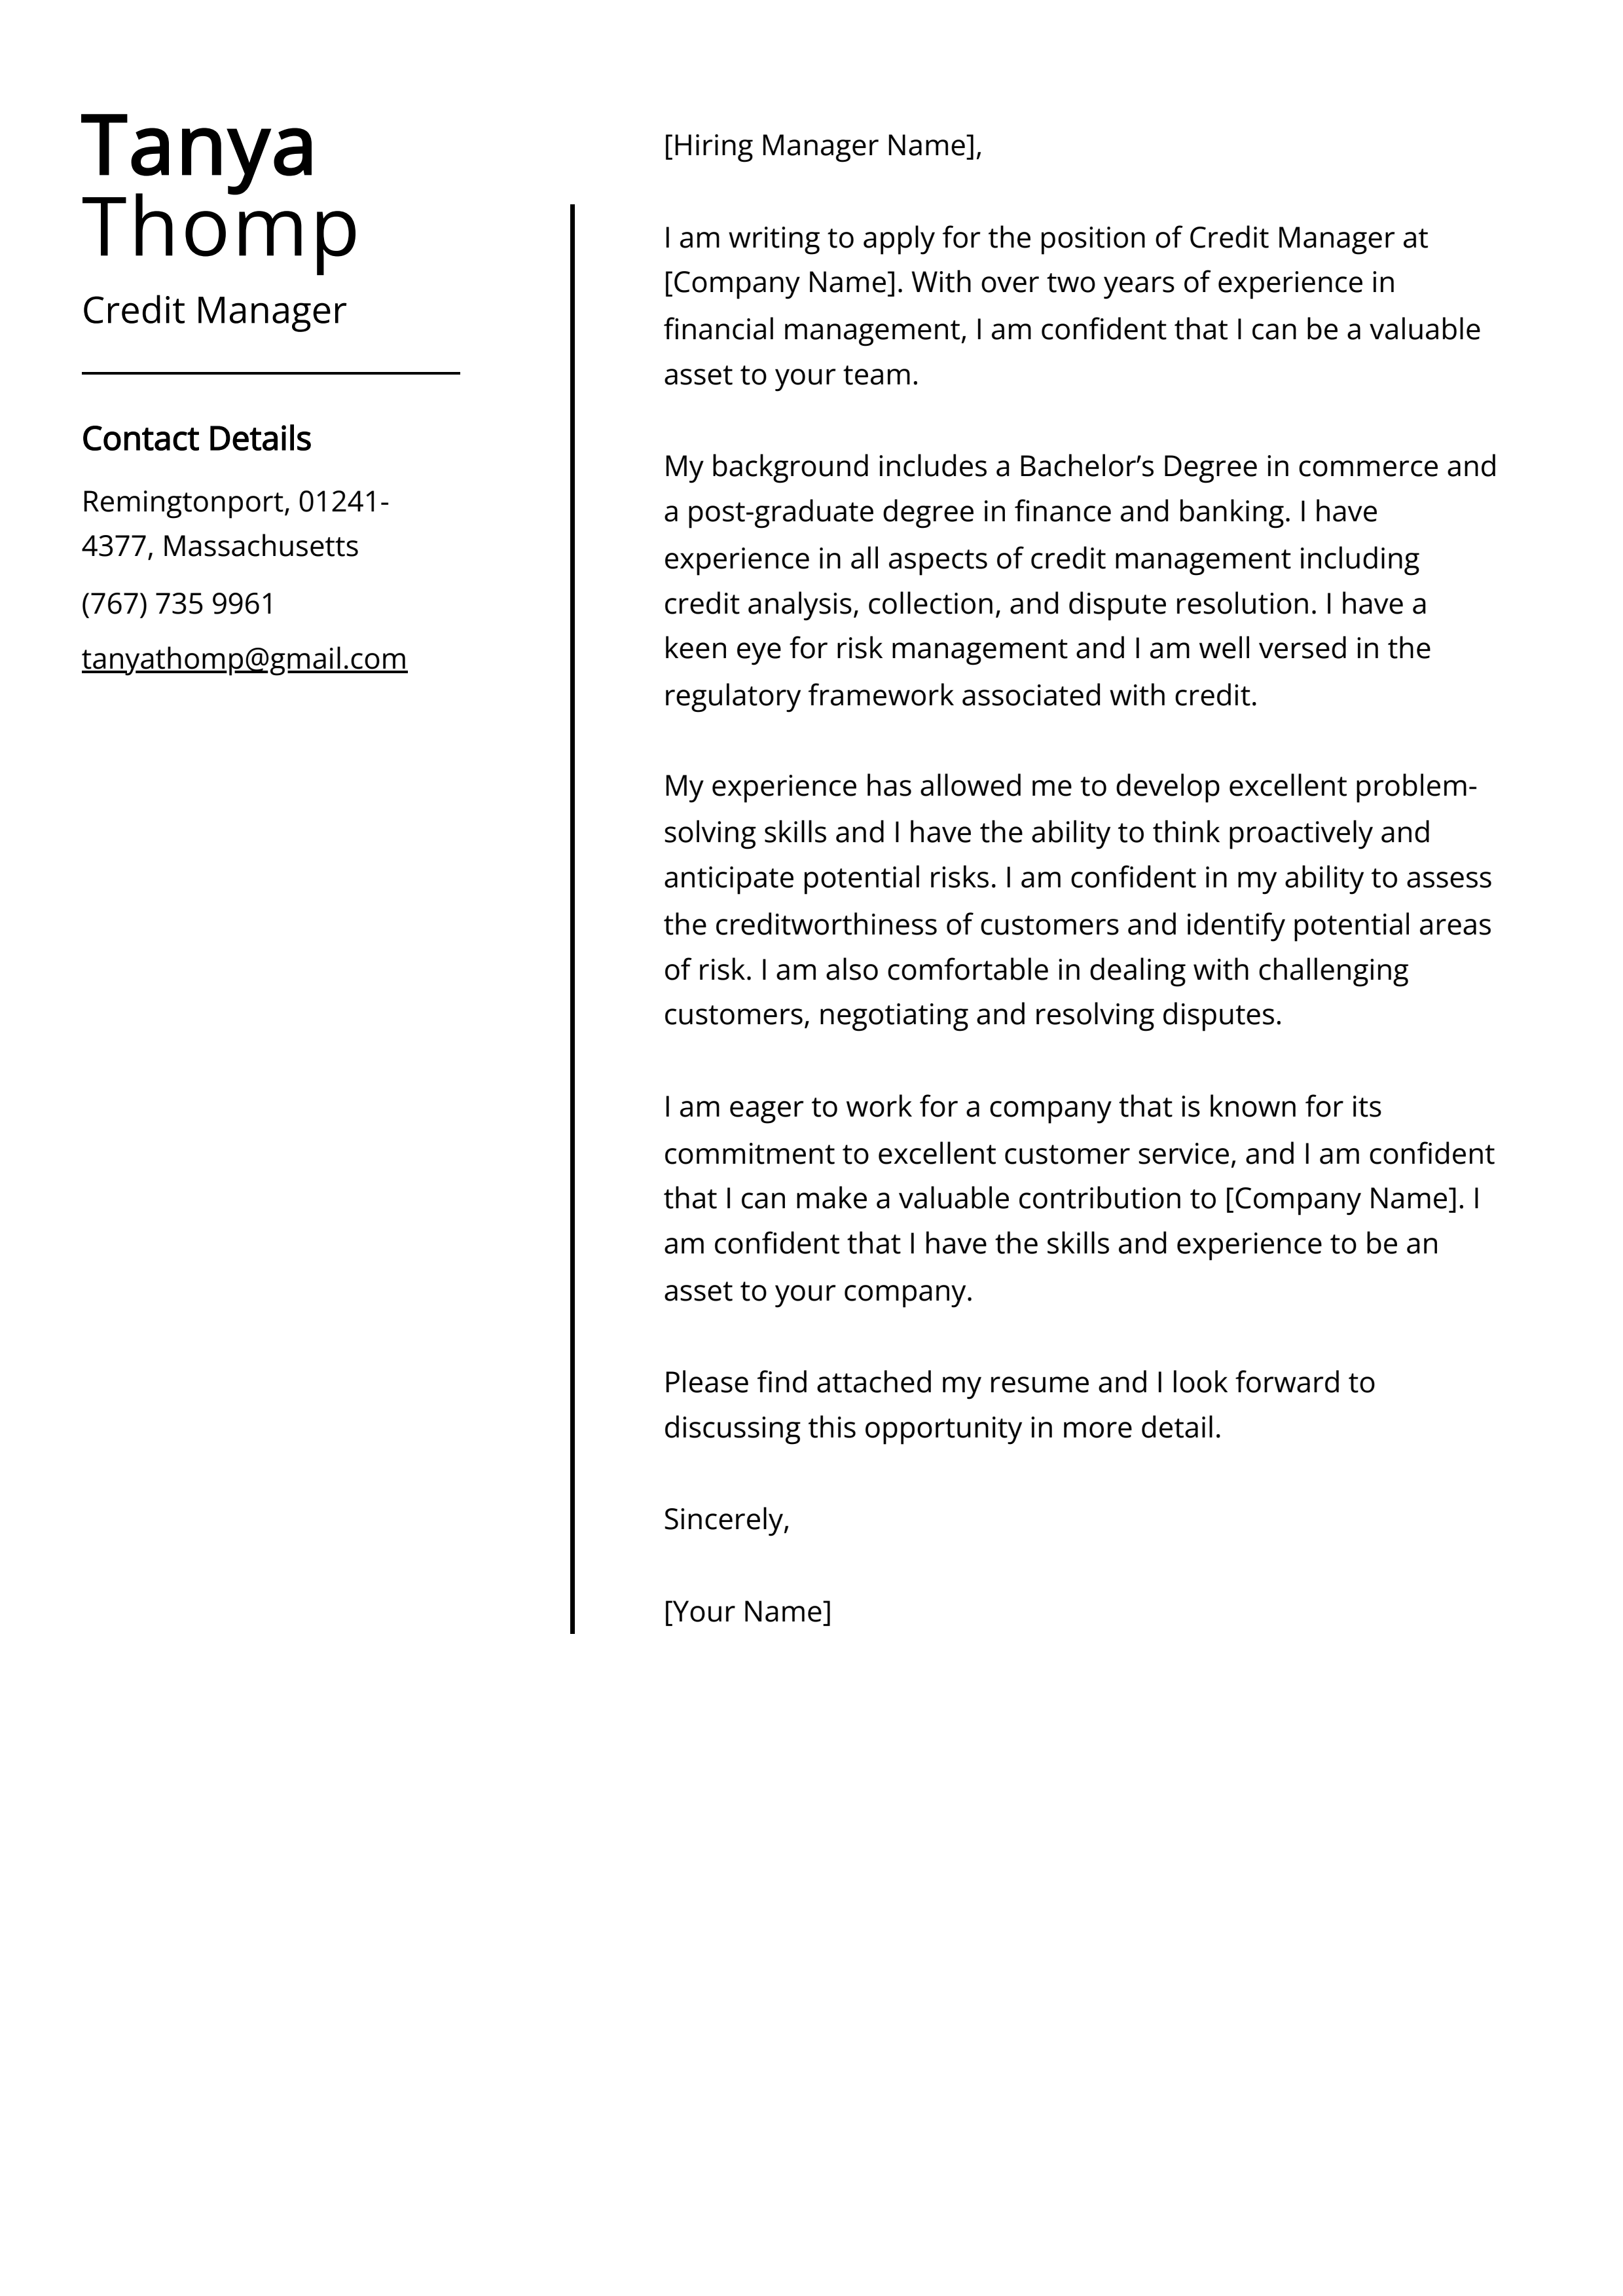 Credit Manager Cover Letter Example